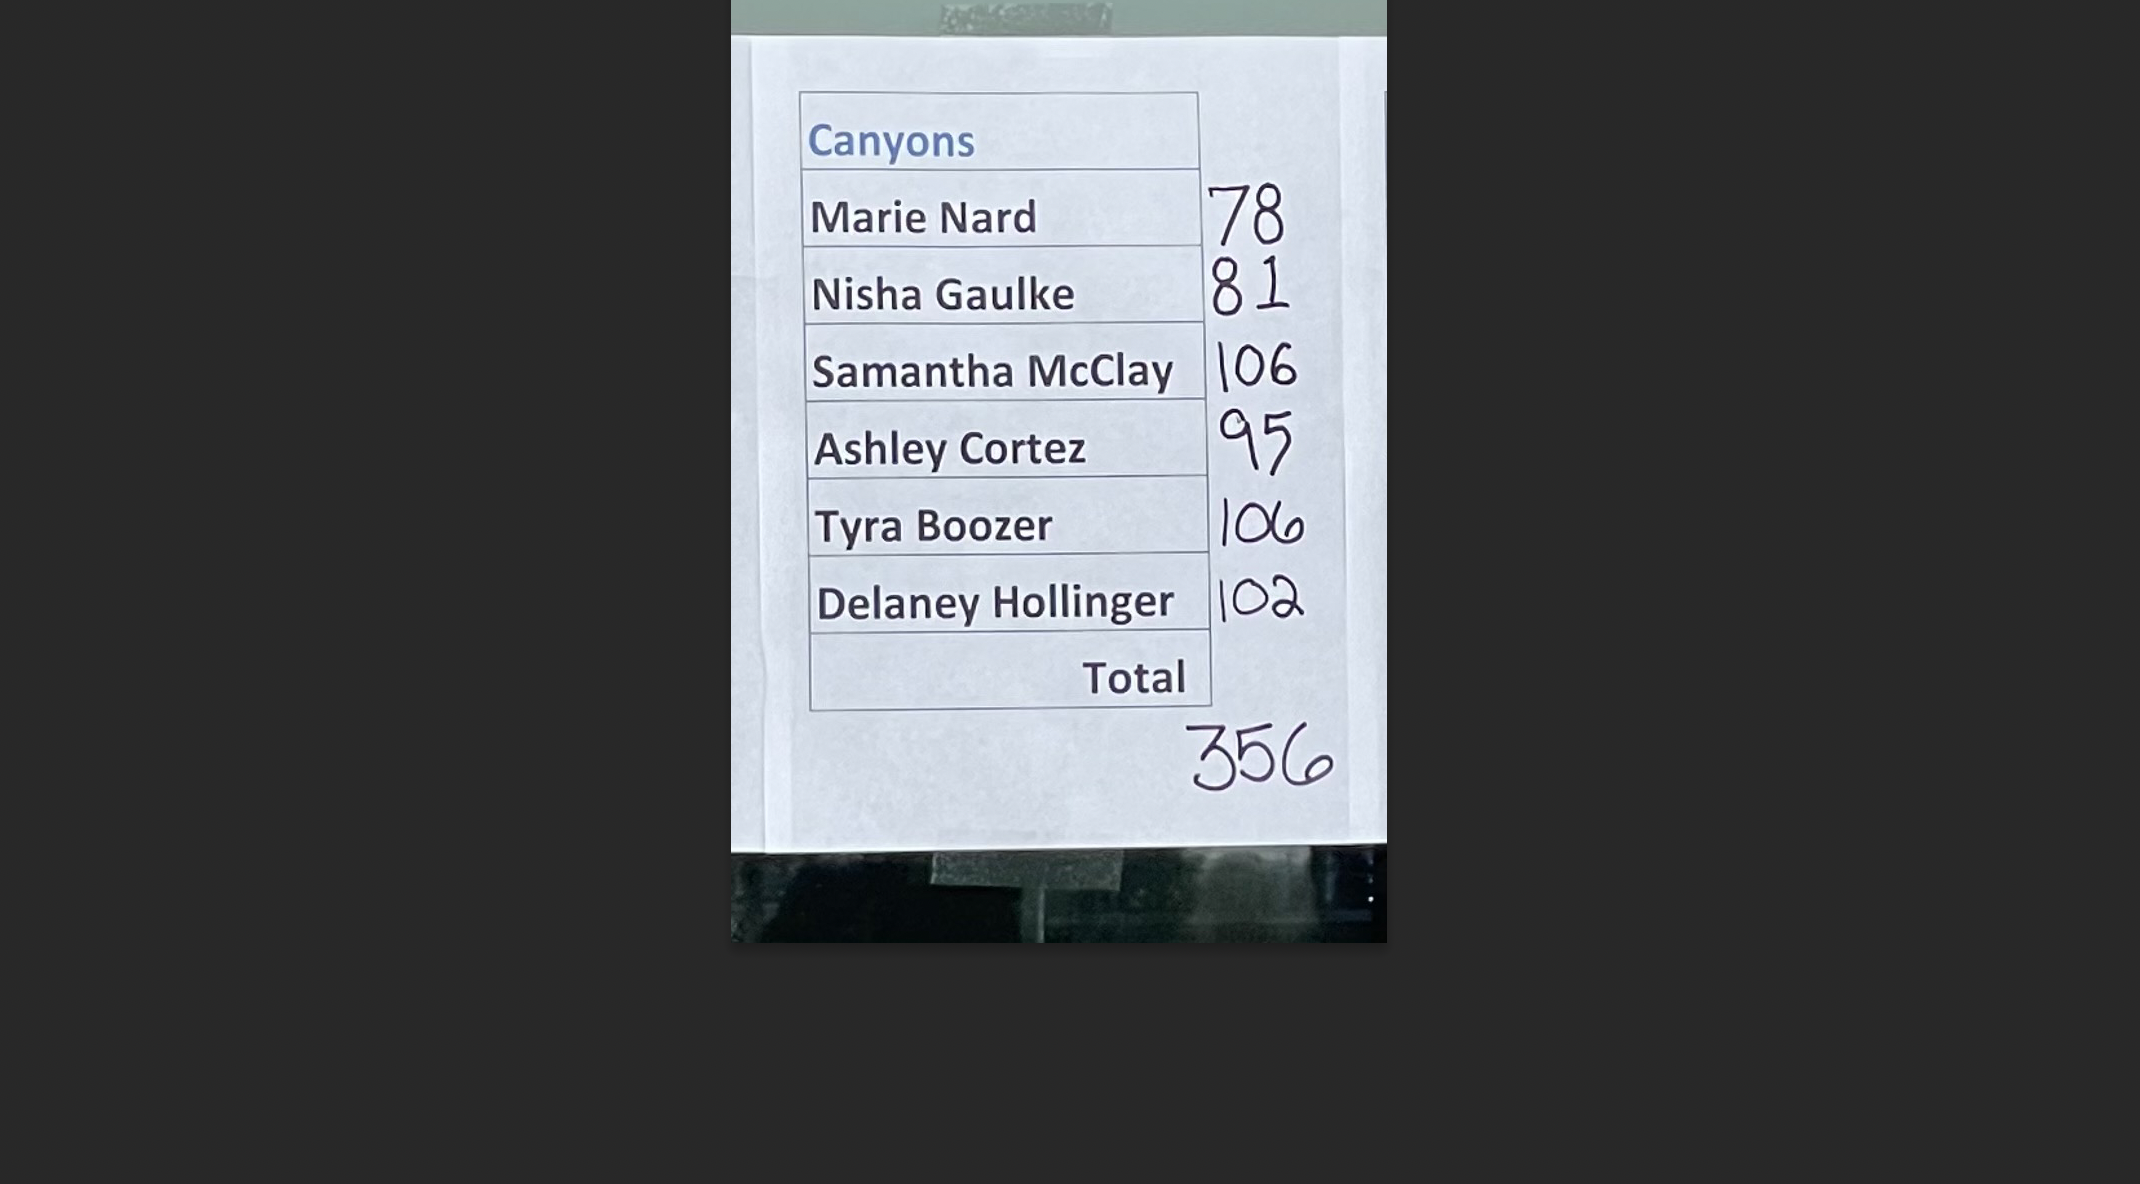 COC women's golf scorecard from event on Aug. 30, 2021.